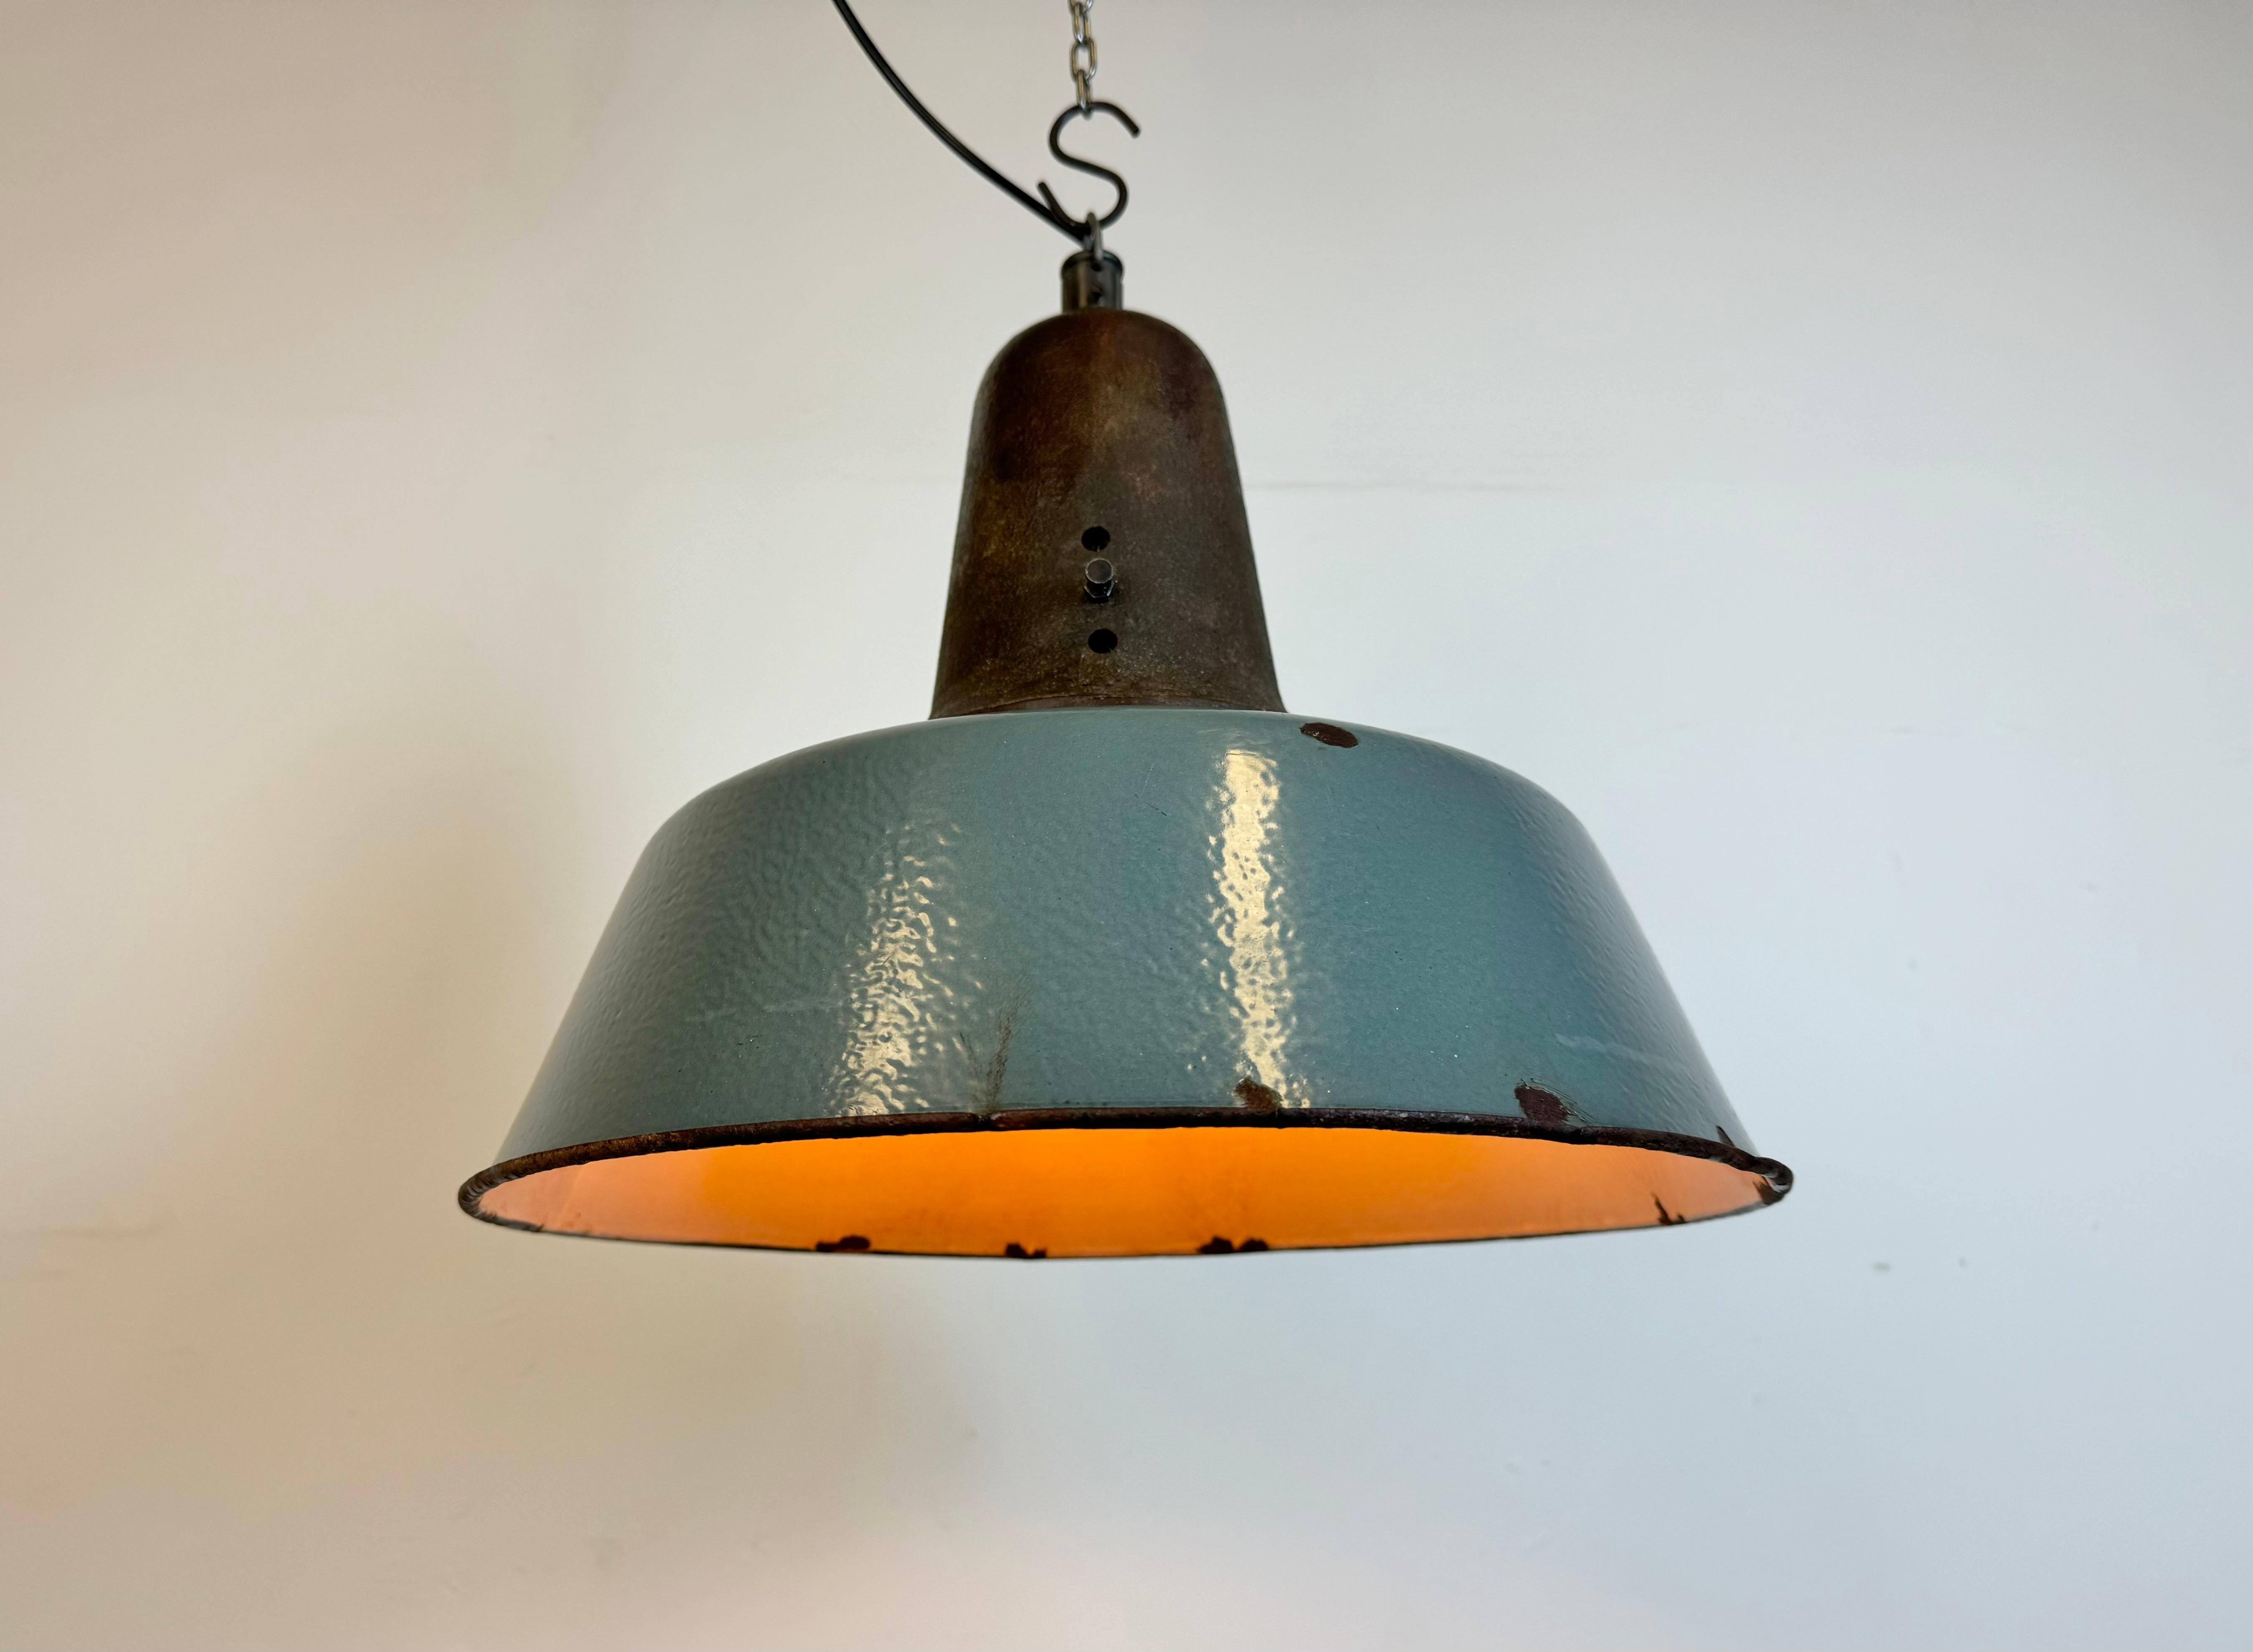 Large Industrial Grey Enamel Factory Lamp with Cast Iron Top, 1960s For Sale 6